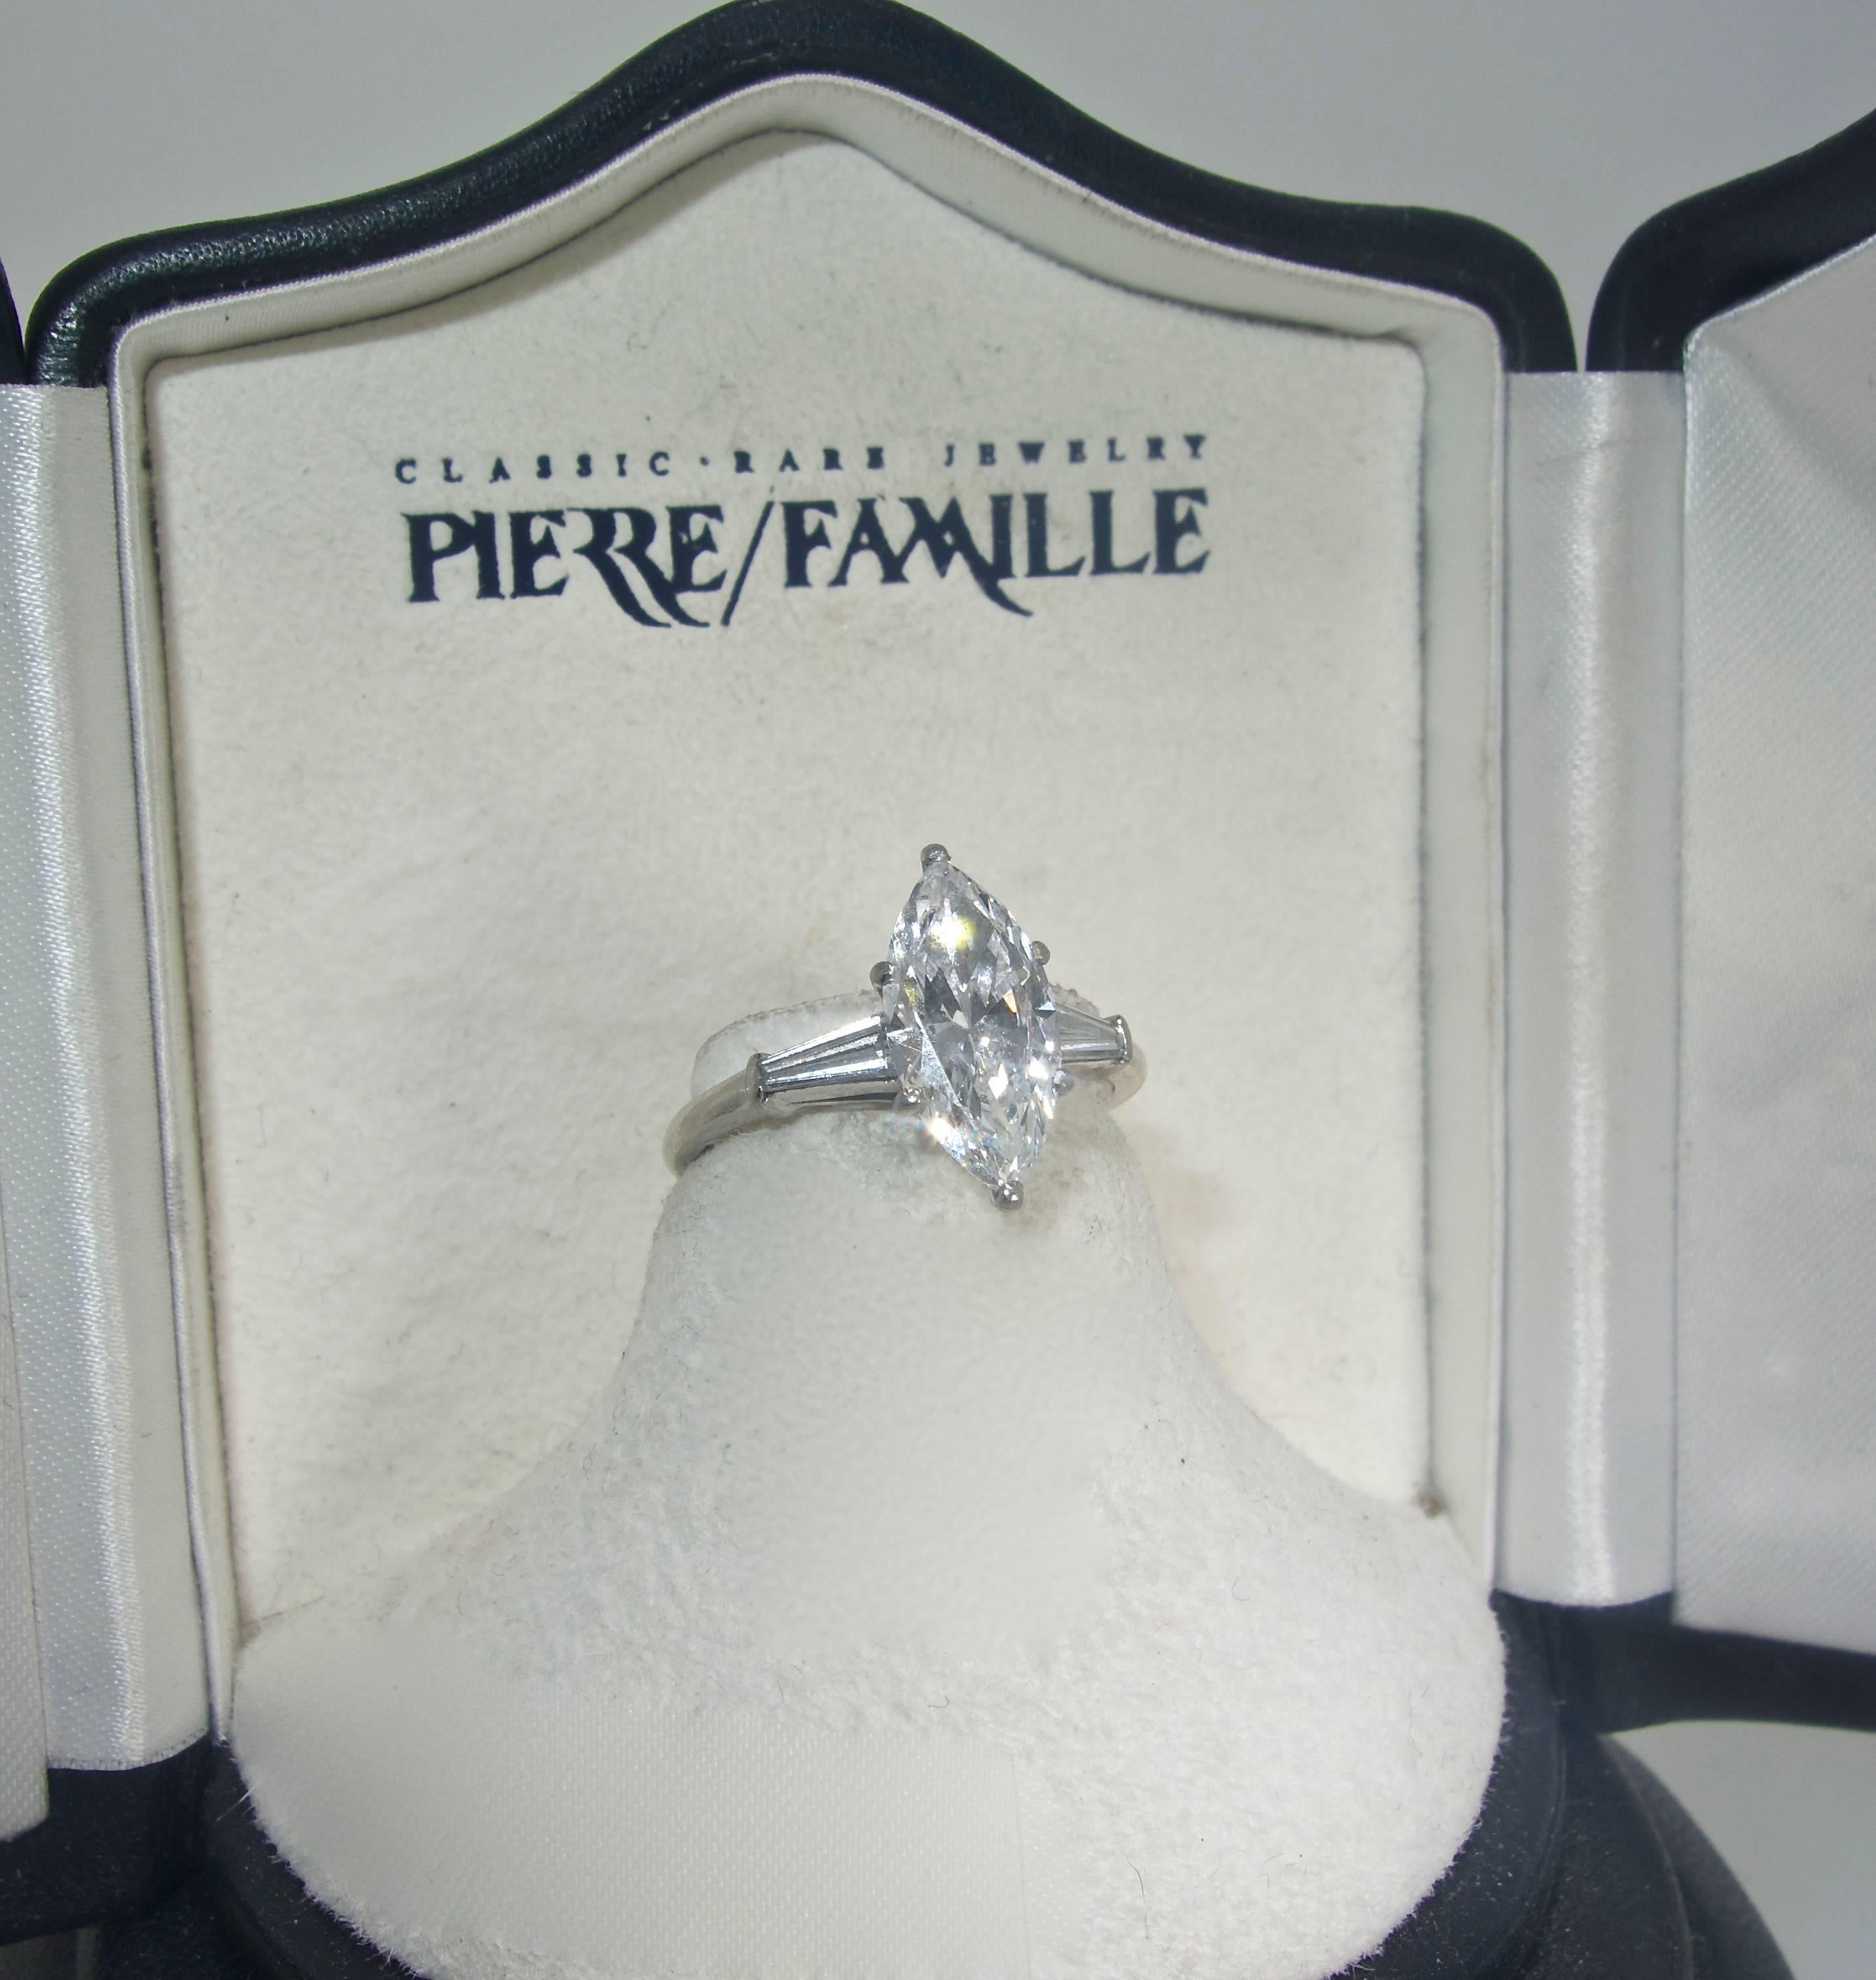 Accompanied by a certificate from the Gemological Institute of America stating that the 2.32 ct. marquis diamond is D (colorless) and VVS2 (very very slightly included to the second degree), this three stone platinum ring is a classic example from